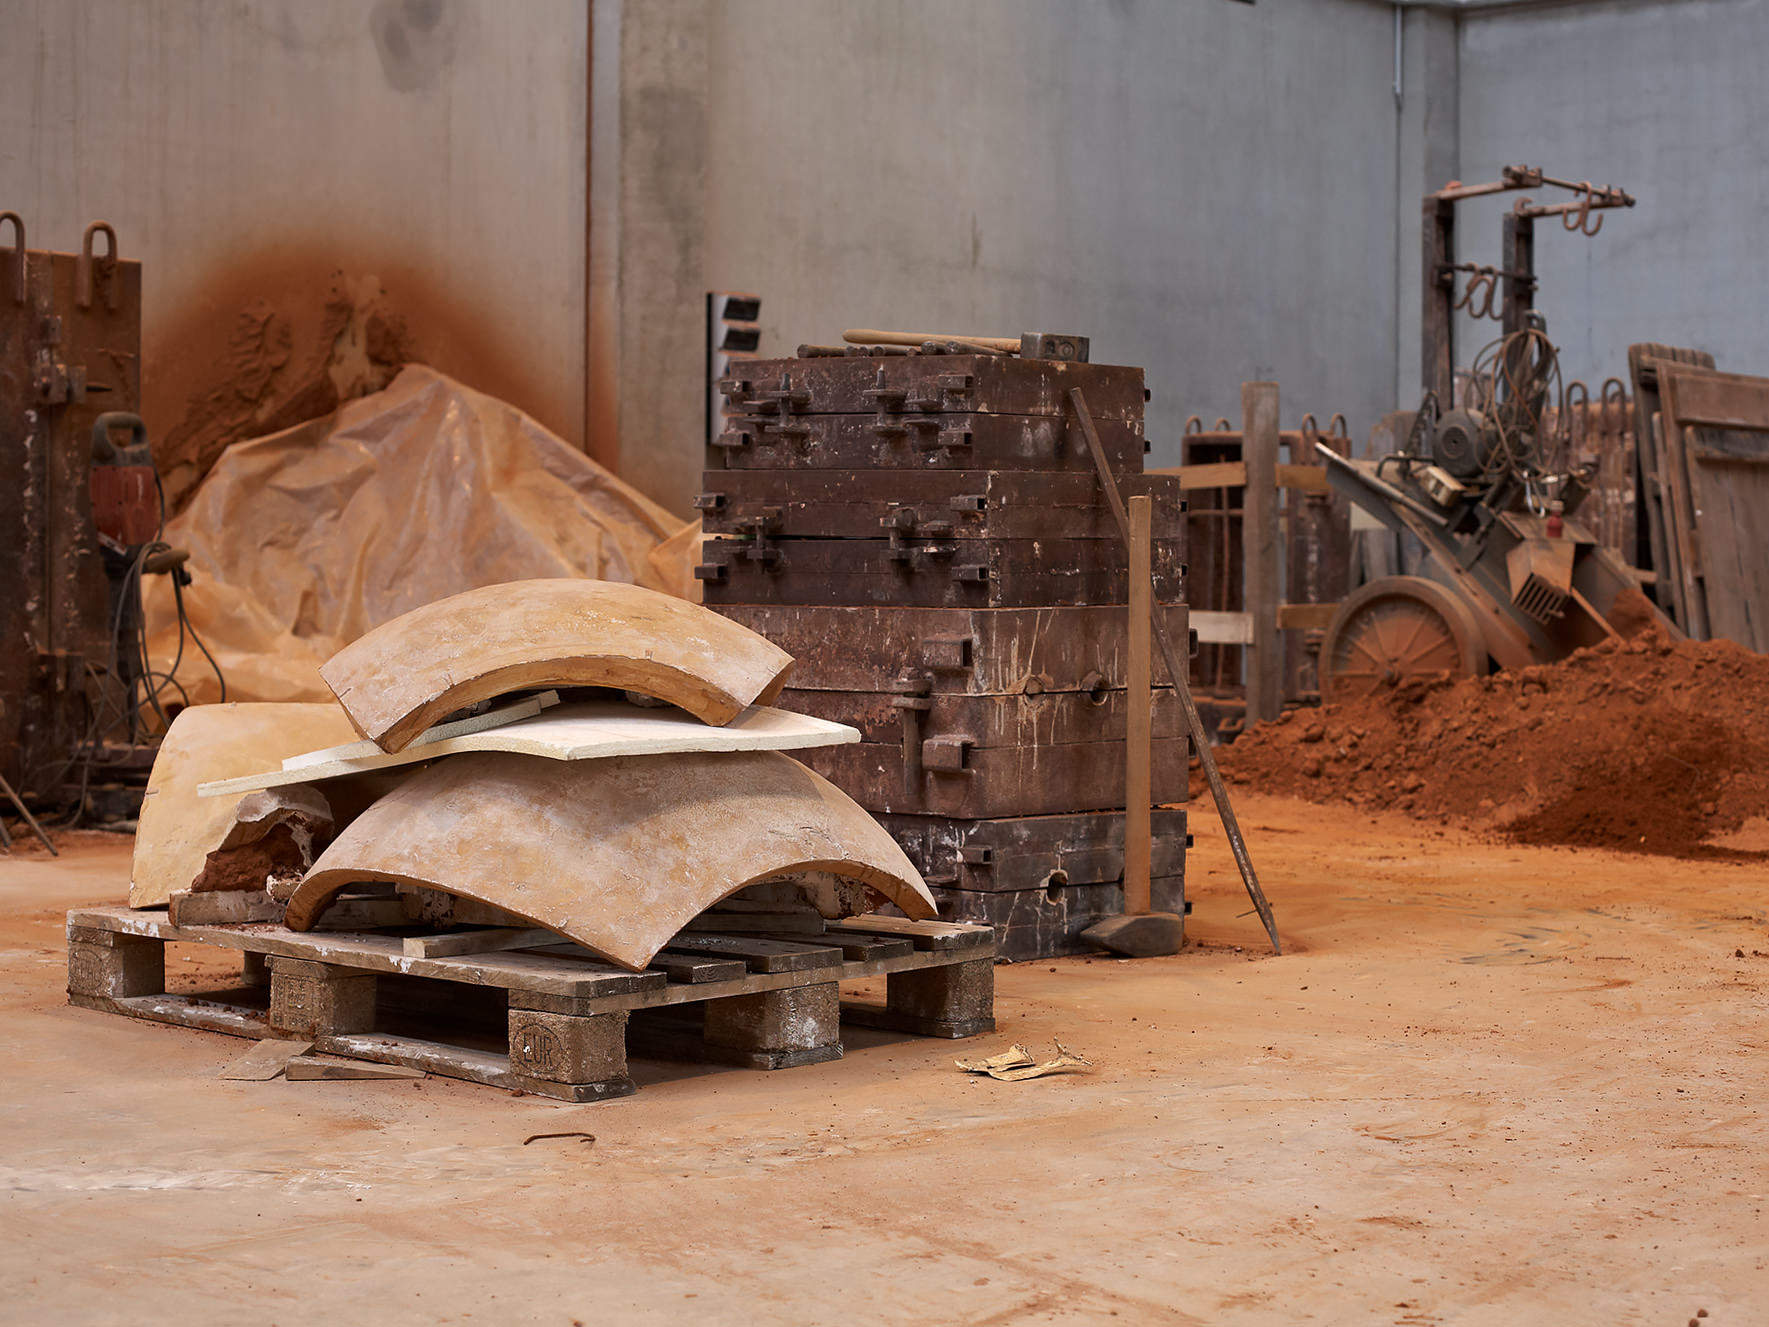 Inside view of the sandforming hall of Noack fine art foundry in Berlin.